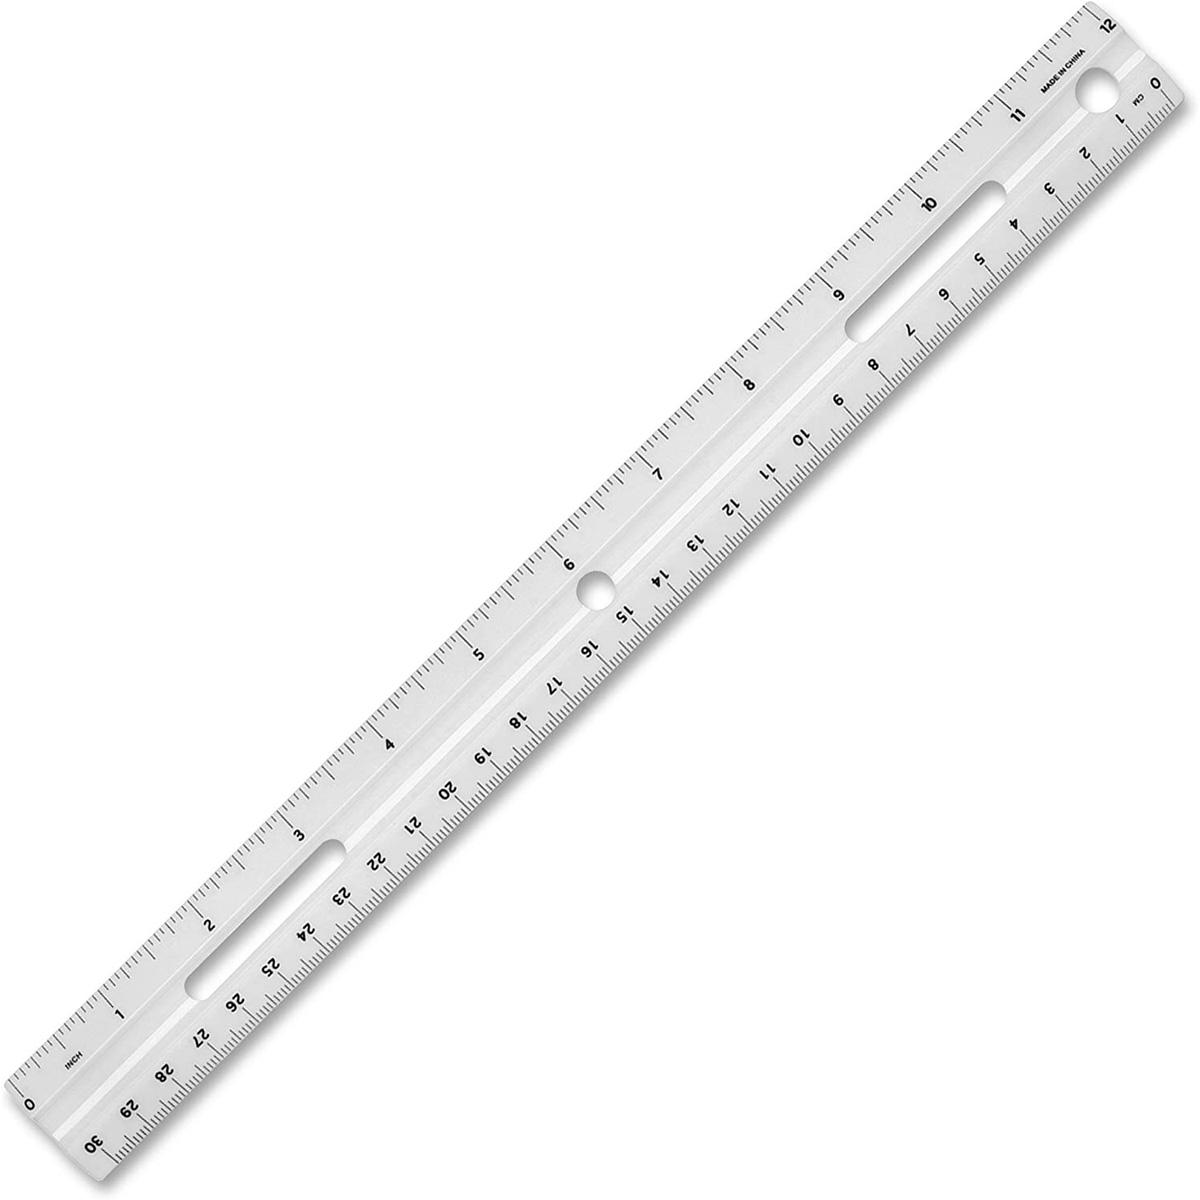 12in Business Source Plastic Ruler for $0.46